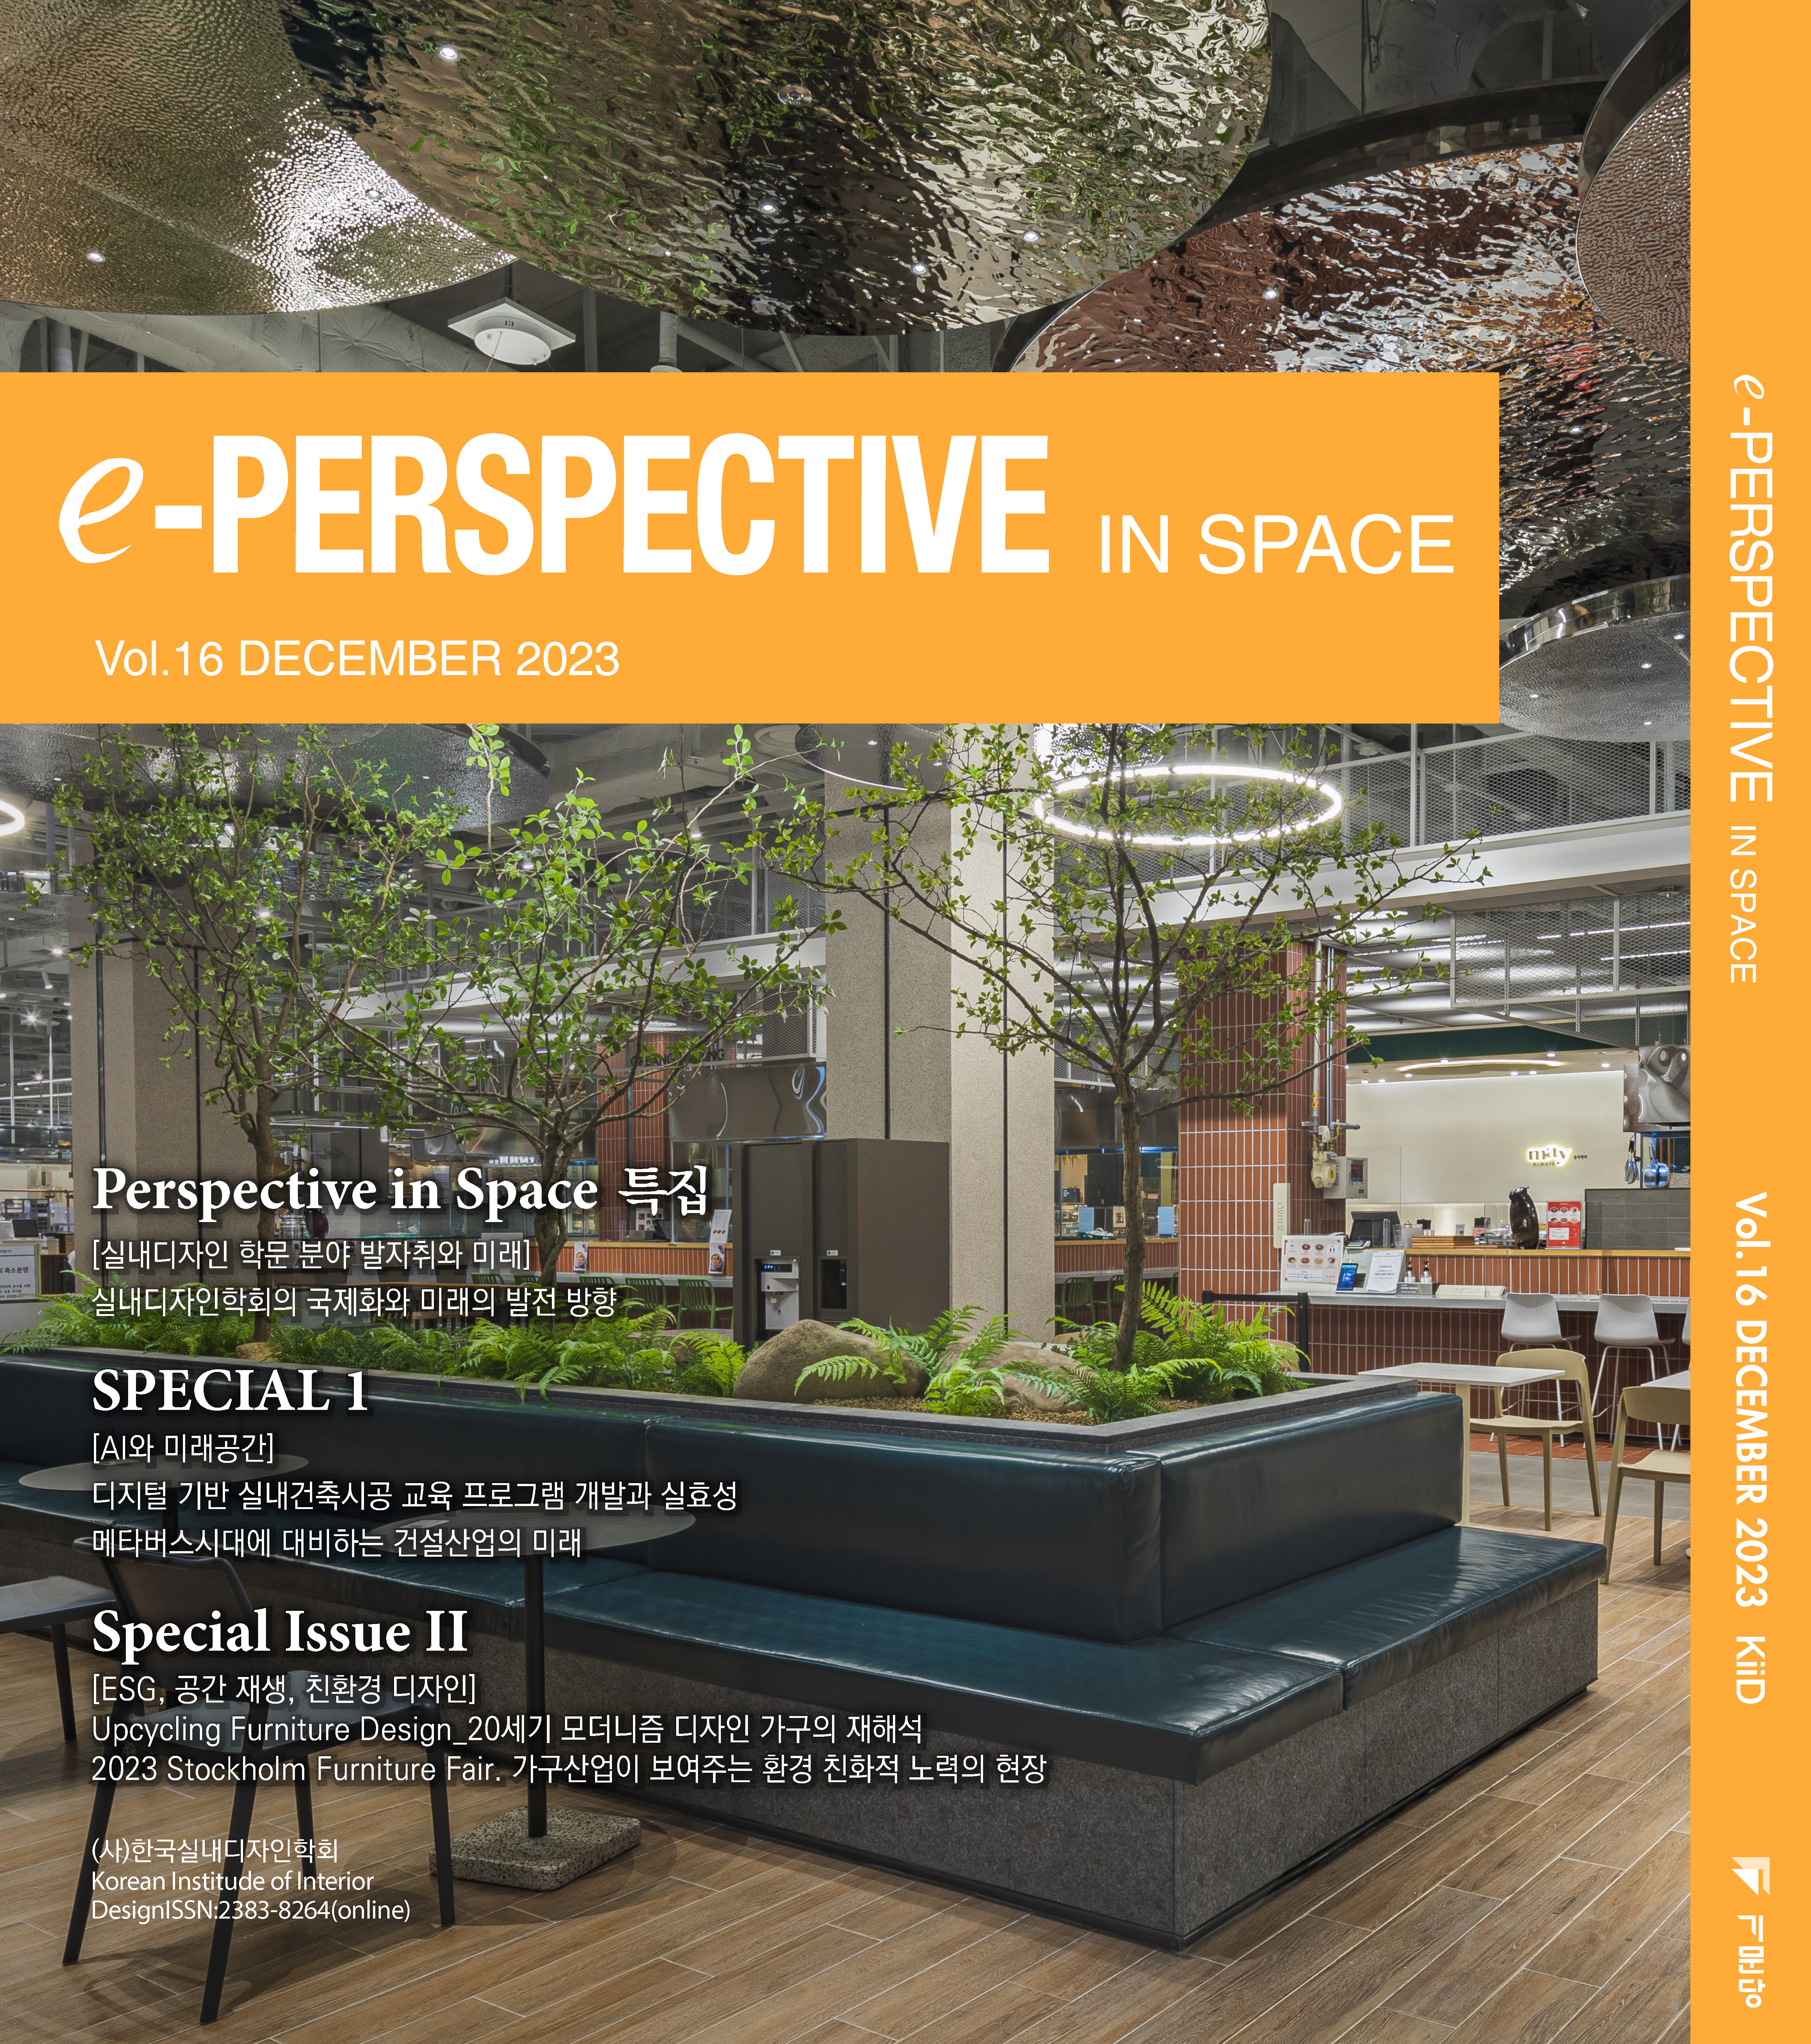 e-PERSPECTIVE IN SPACE Vol.16